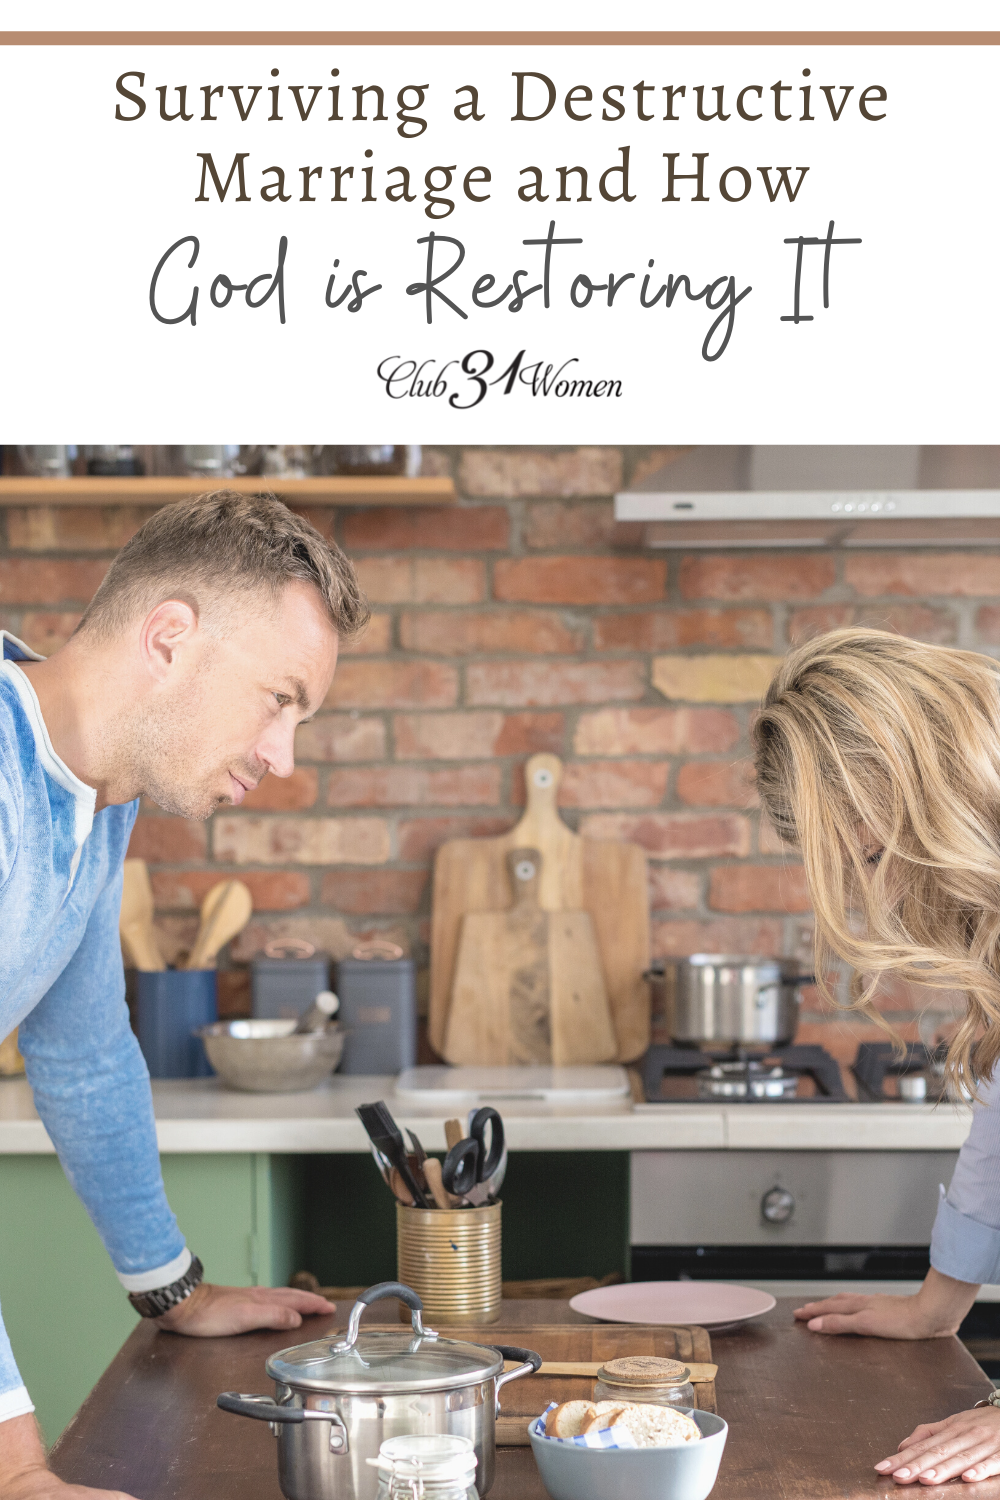 What do you do when you find yourself in a destructive marriage? It can be both devastating yet enlightening but leave you confused. via @Club31Women